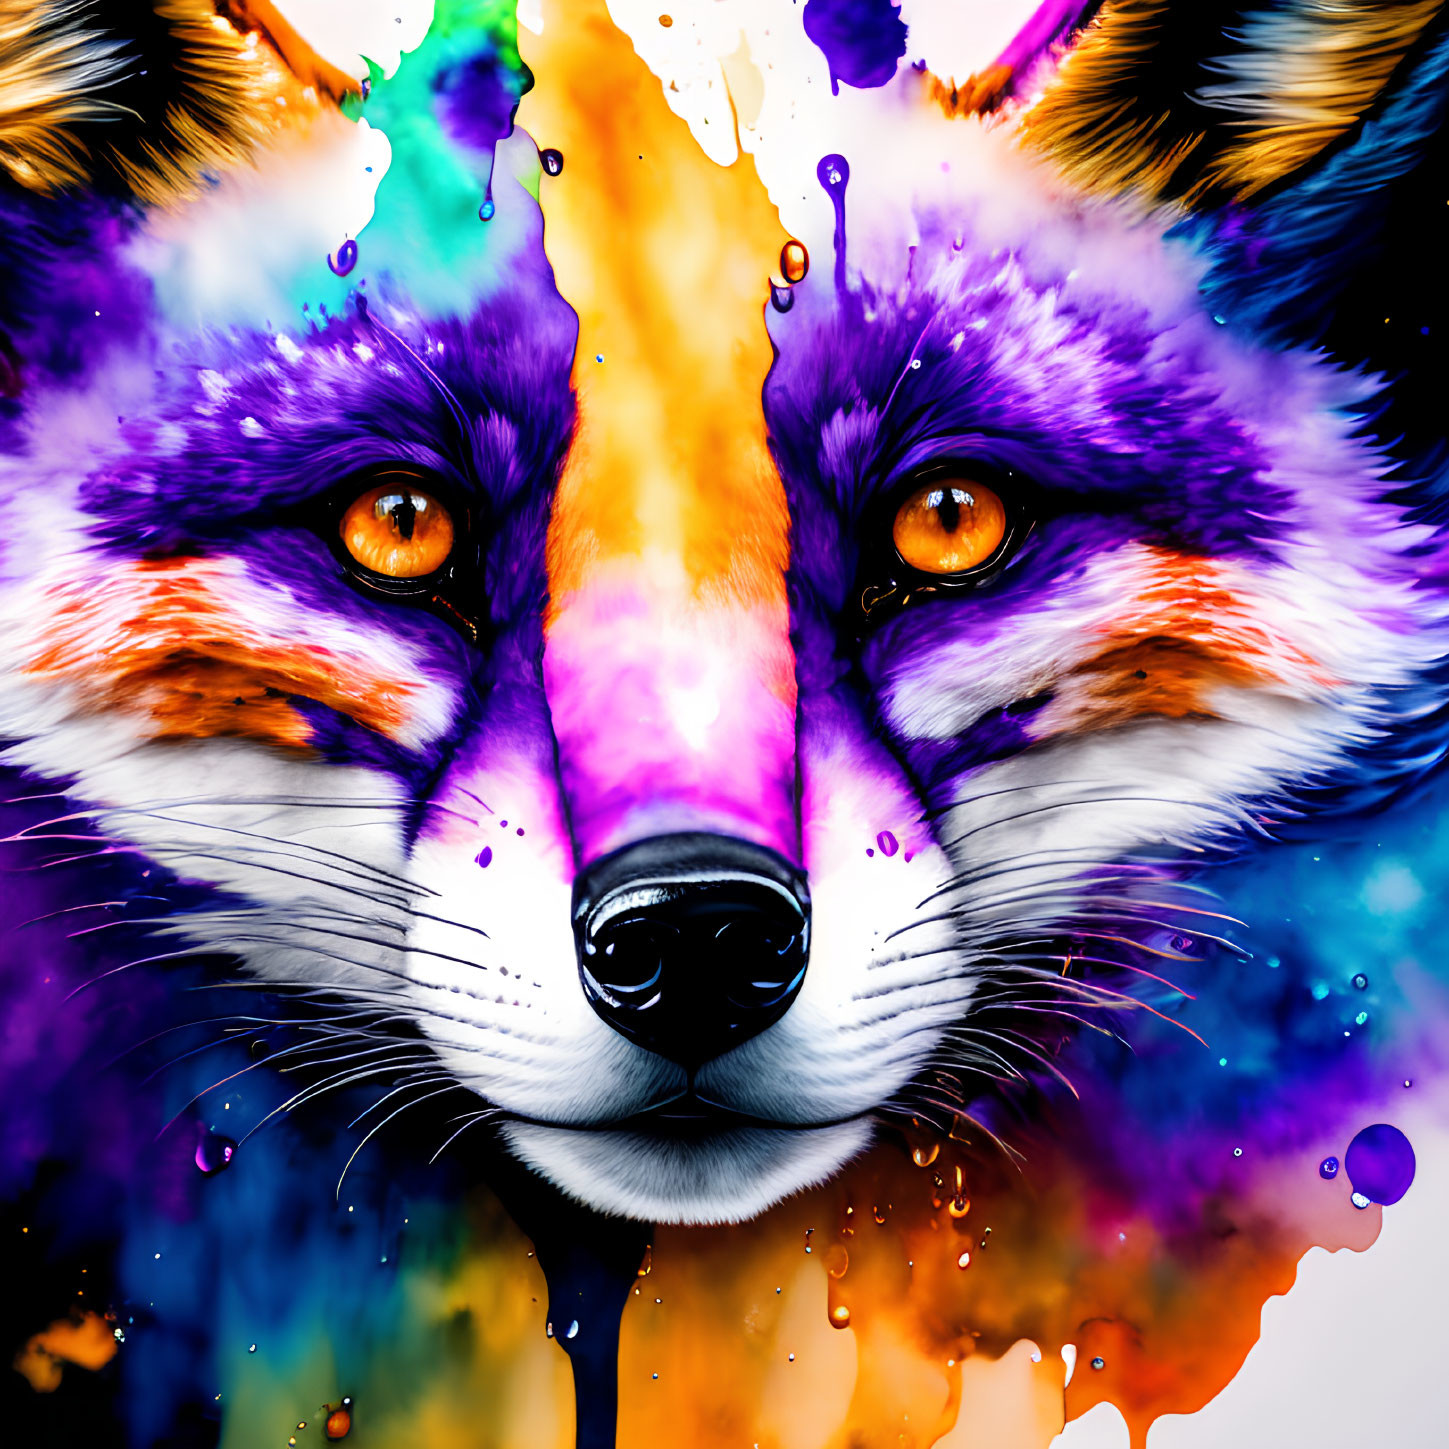 Colorful Fox Face Artwork with Intense Orange Eyes and Dripping Paint